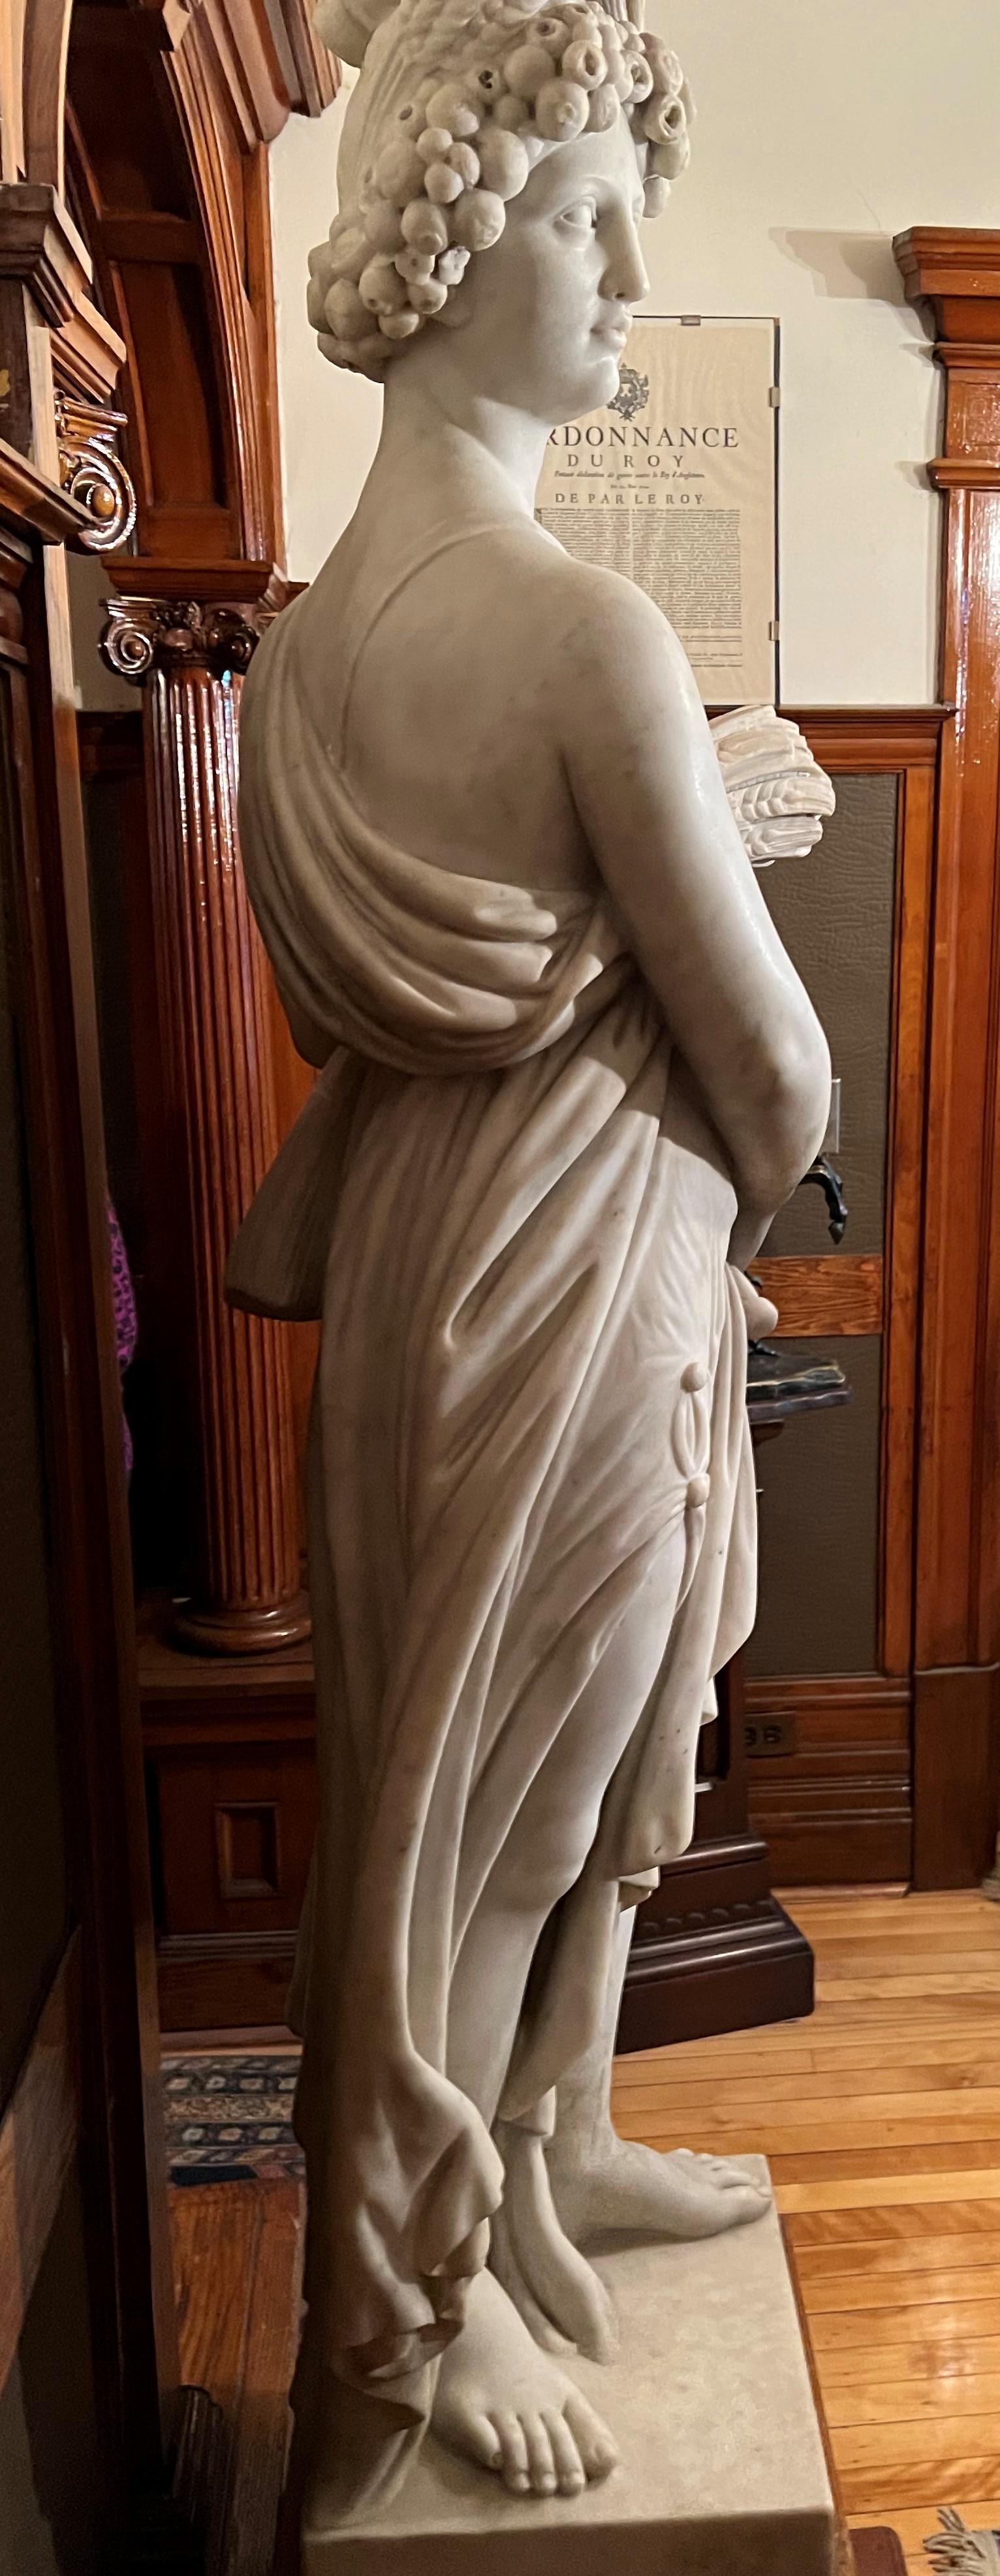 Hand-Carved Near Life-Sized Italian White Marble Figure of Ceres, After the Antique